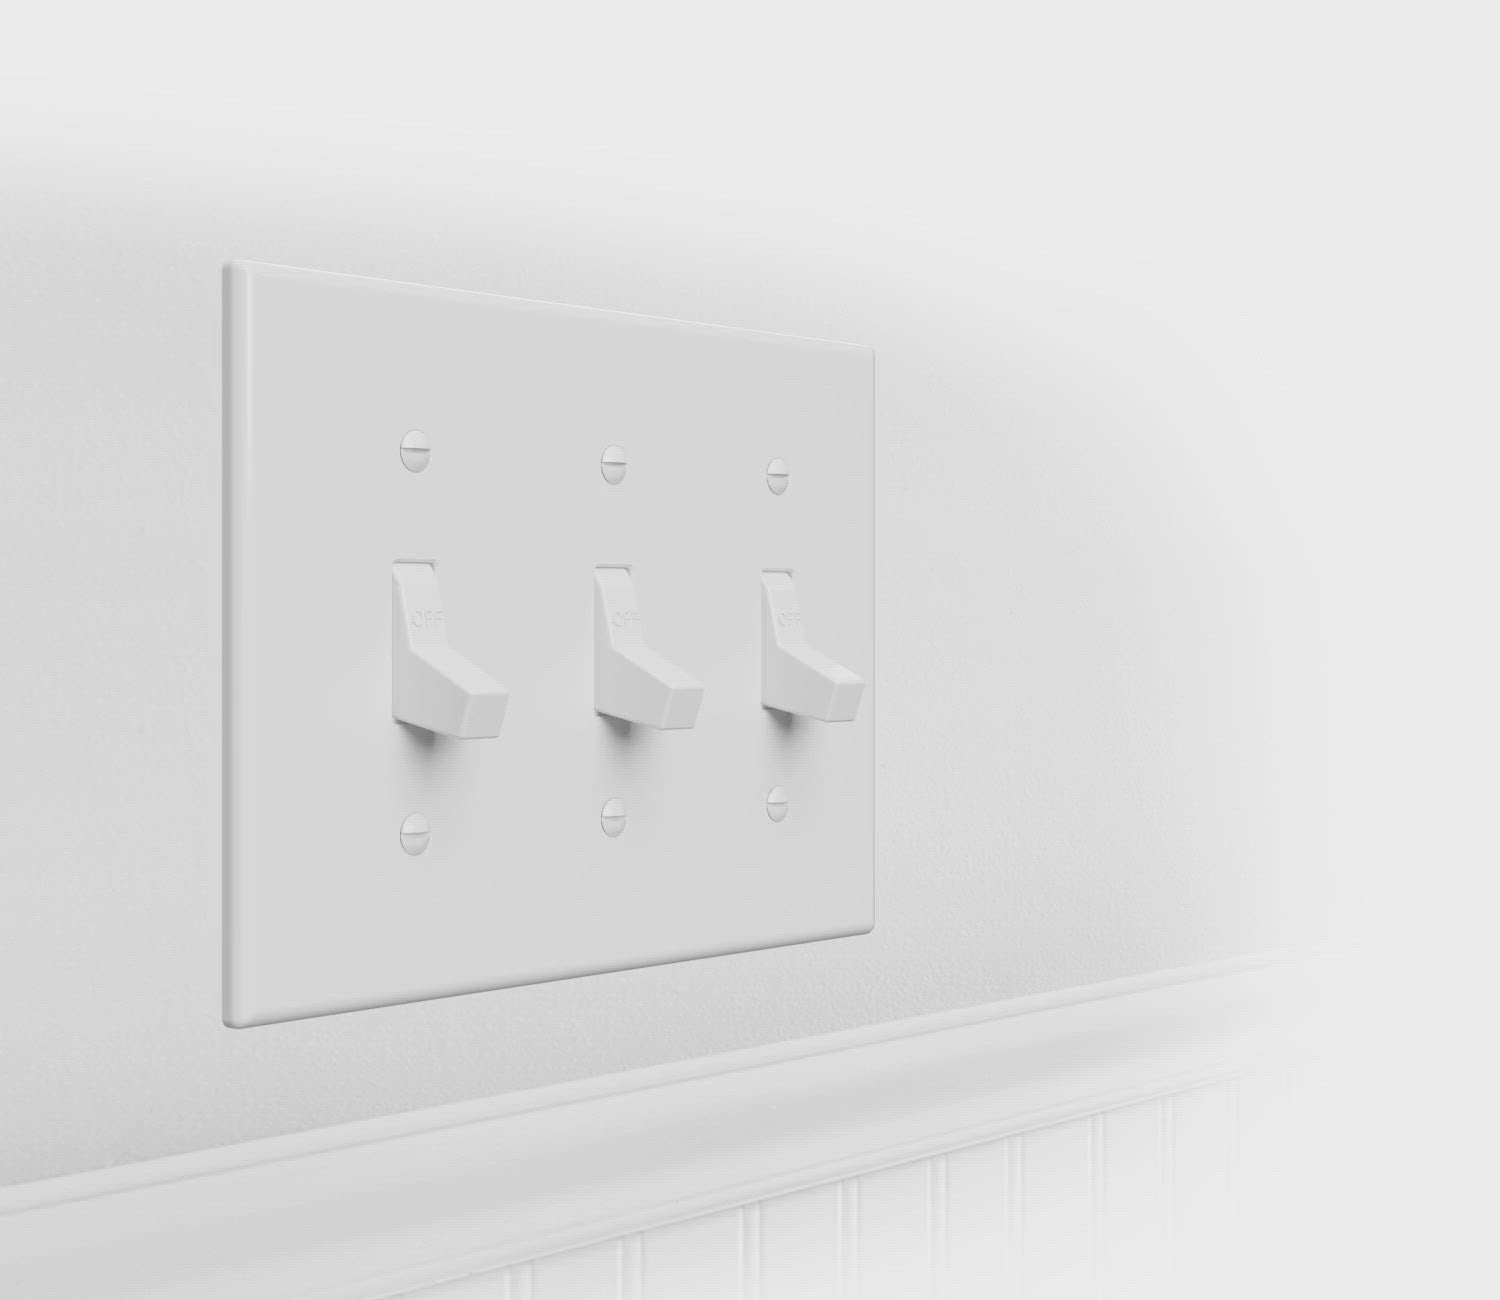 How to replace a standard light switch to All-in-One Smart Home Control with Three Switches - Video